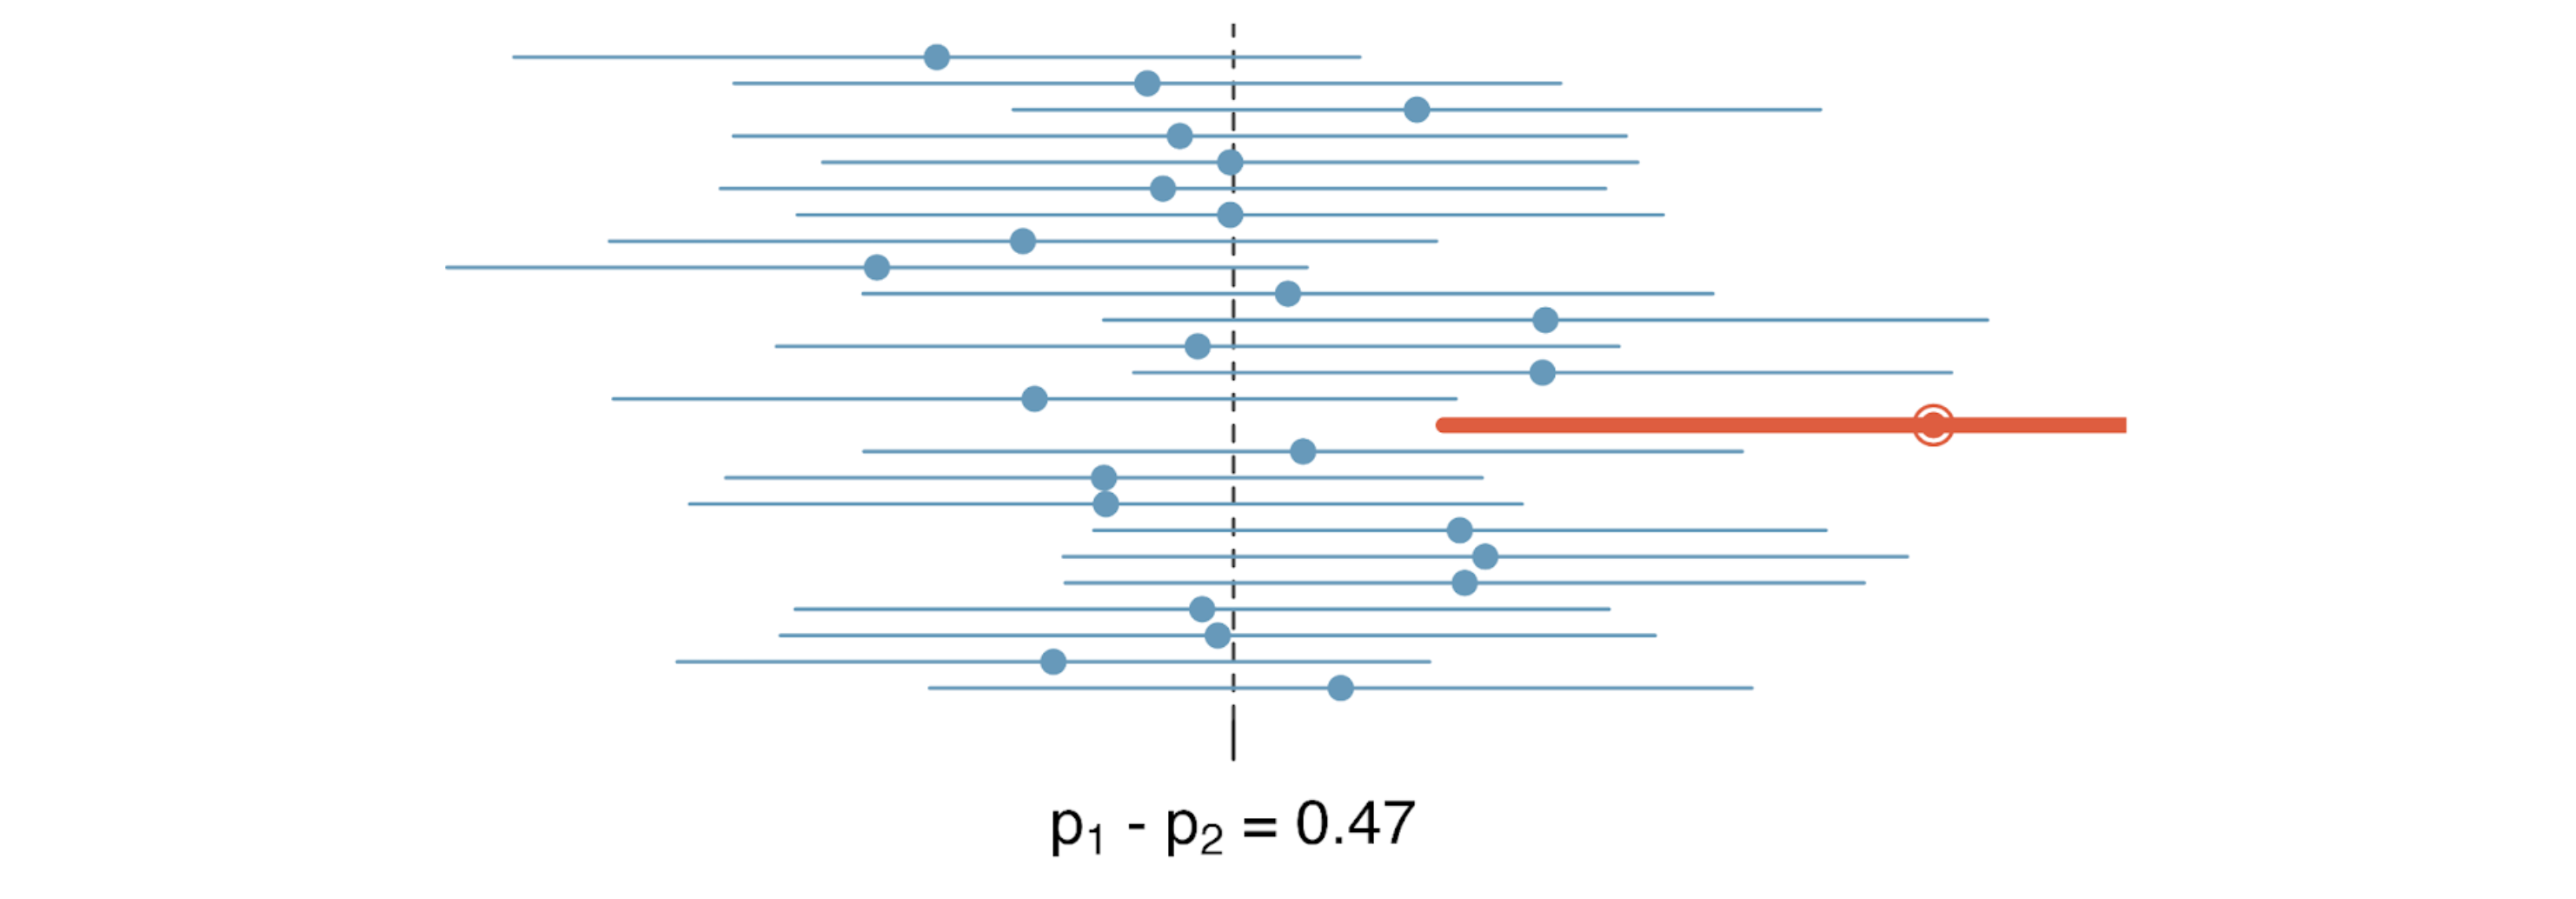 Displays 25 confidence intervals for difference in population proportions, based on 25 independent samples.  The image describes the idea behind confidence levels.